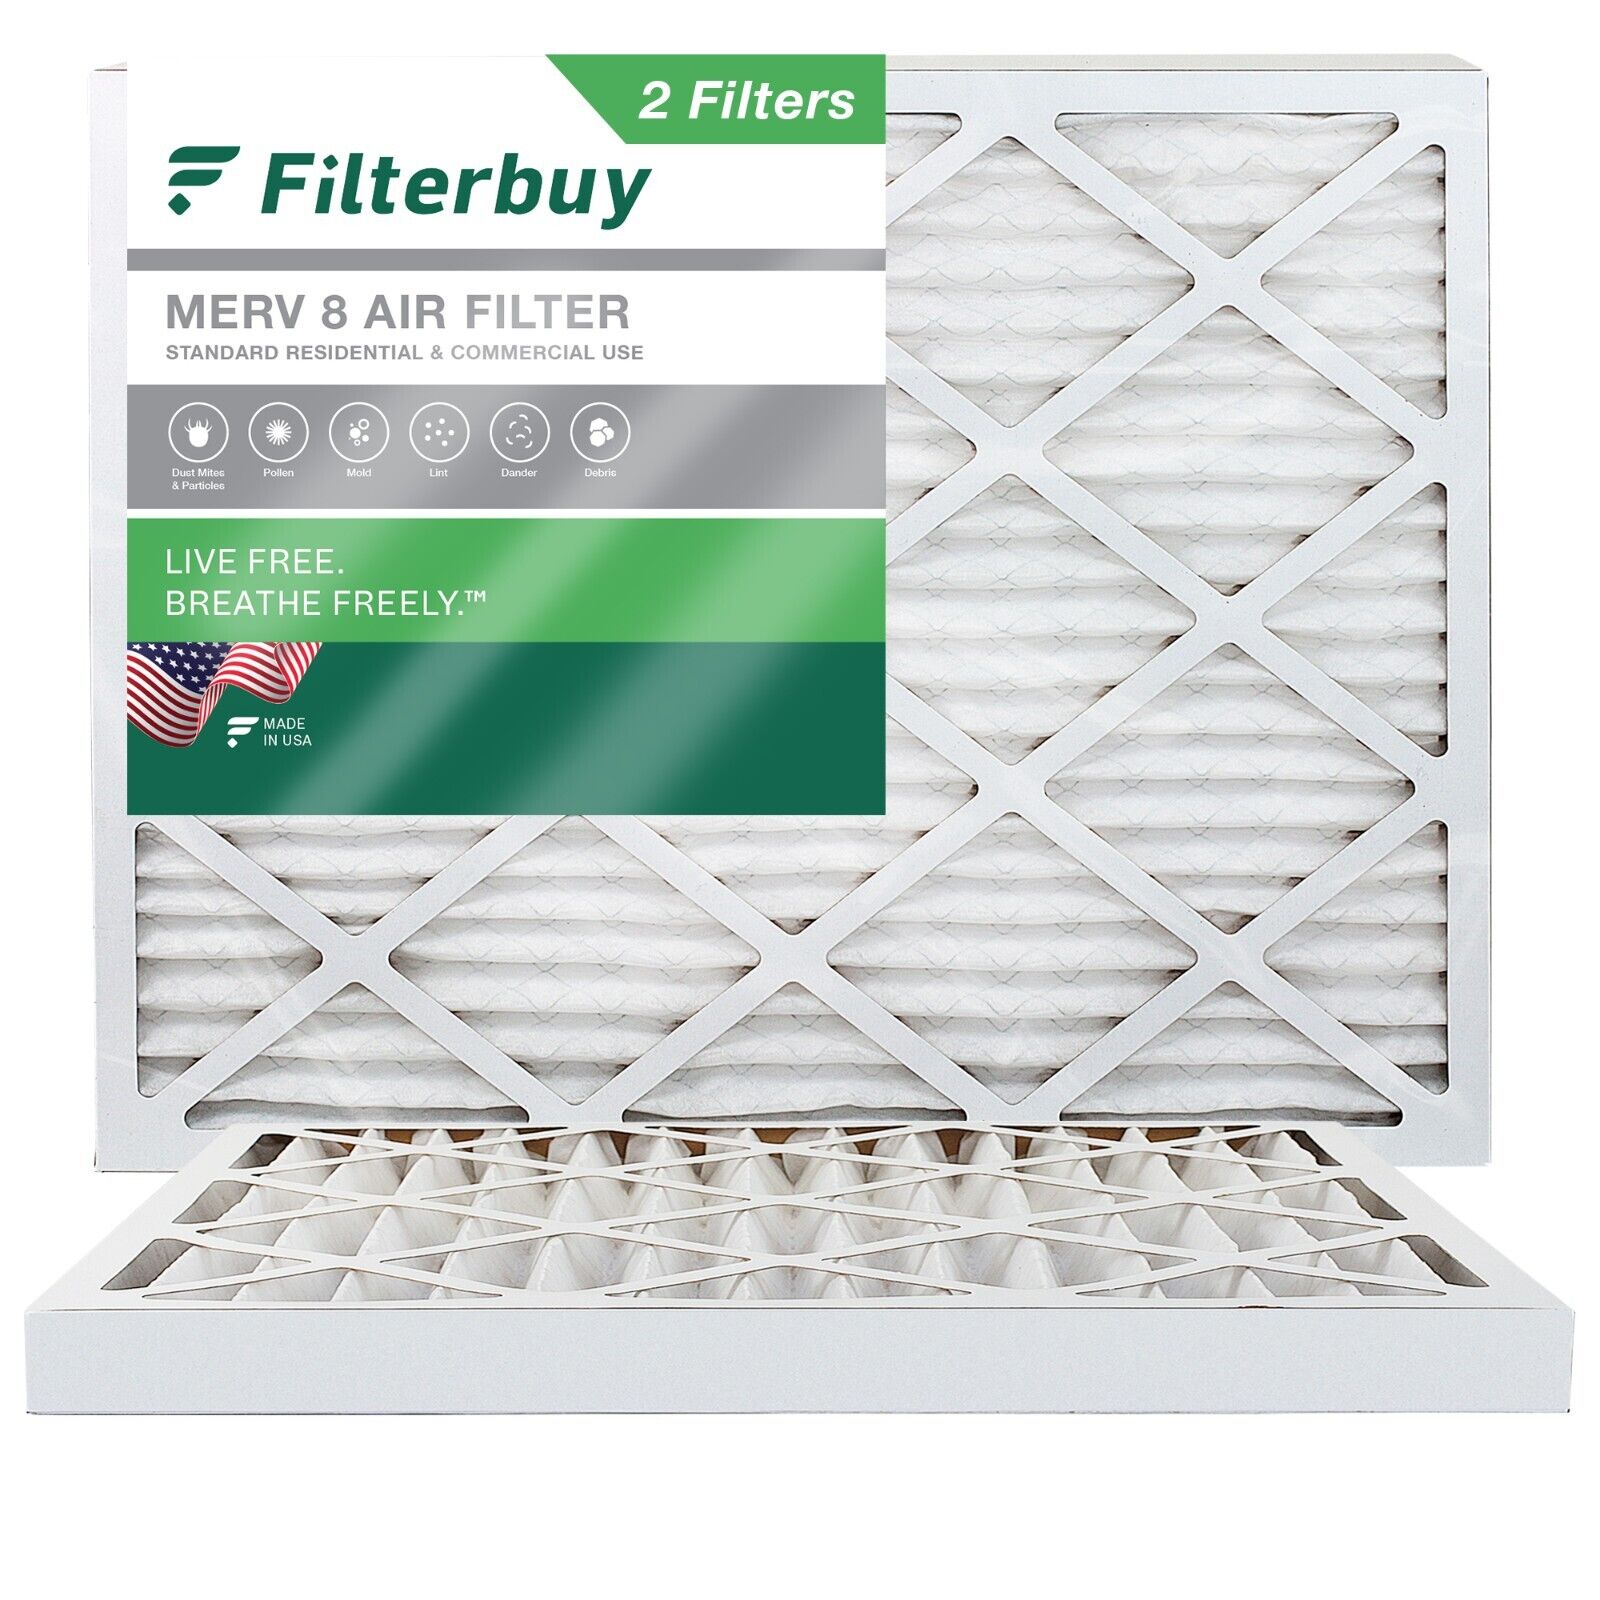 Filterbuy 20x25x2 Pleated Air Filters, Replacement for HVAC AC Furnace (MERV 8)